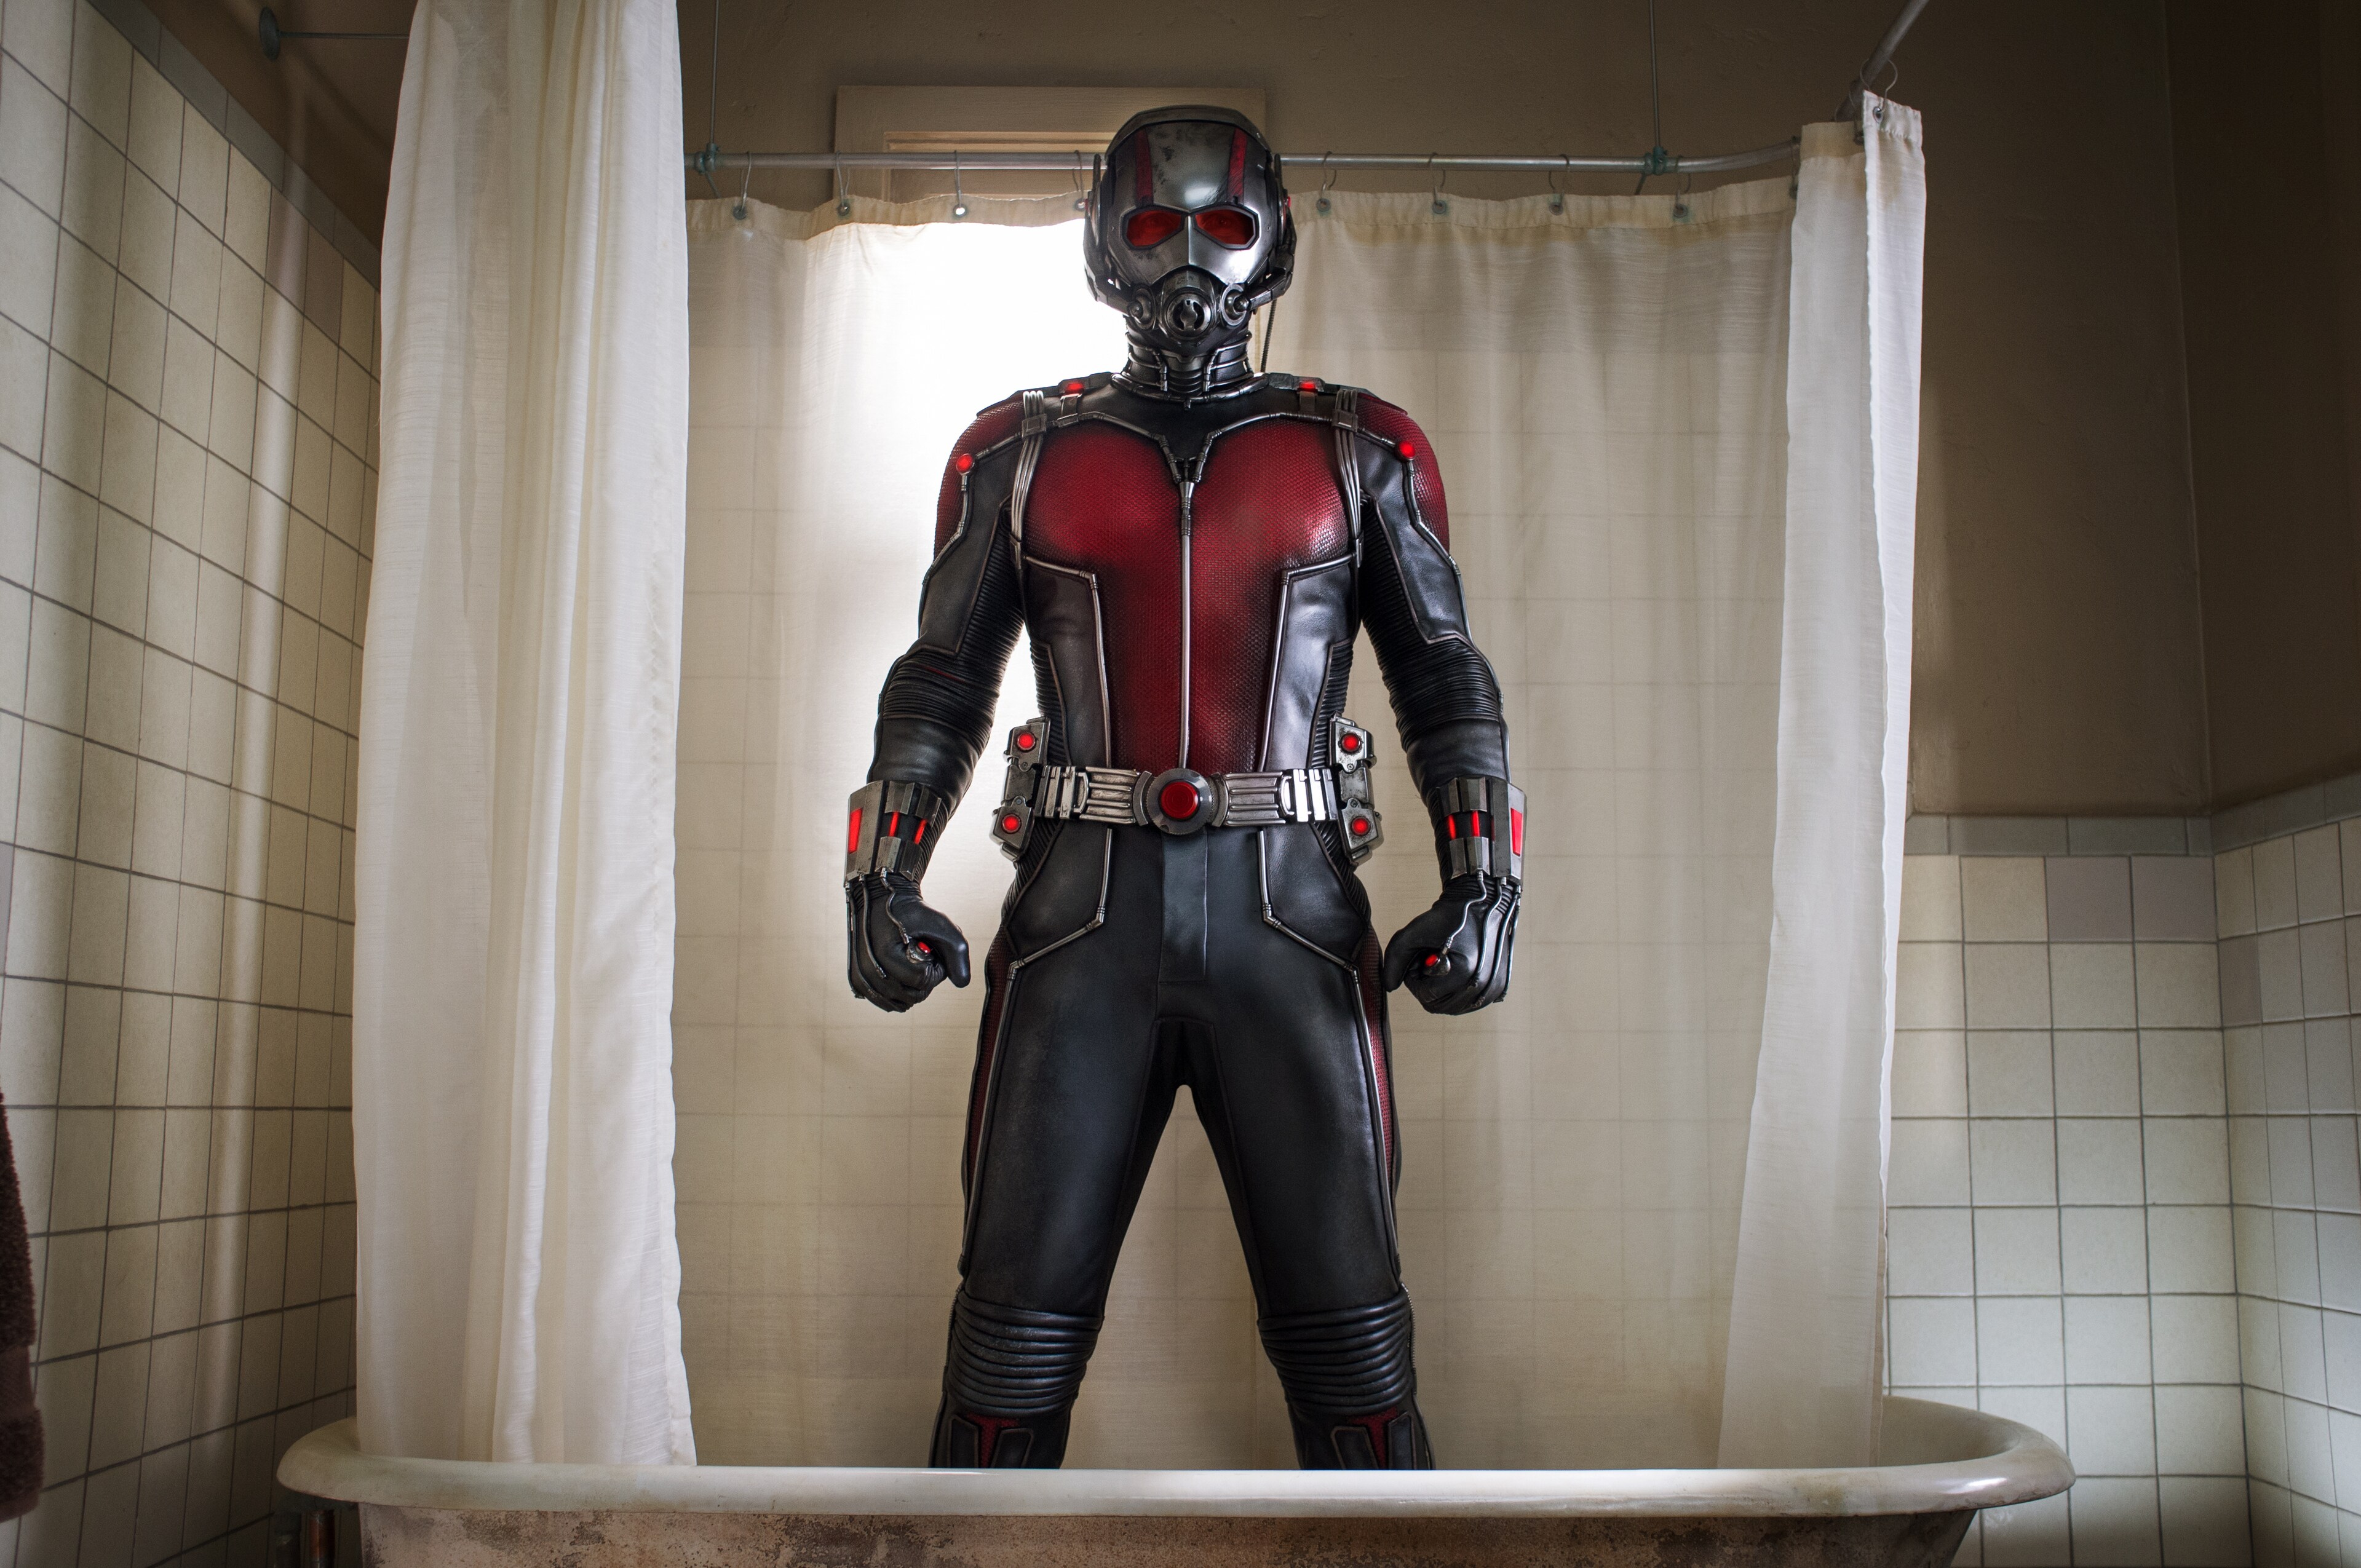 Paul Rudd (as Scott Lang) wearing Ant-Man suit standing in a tub